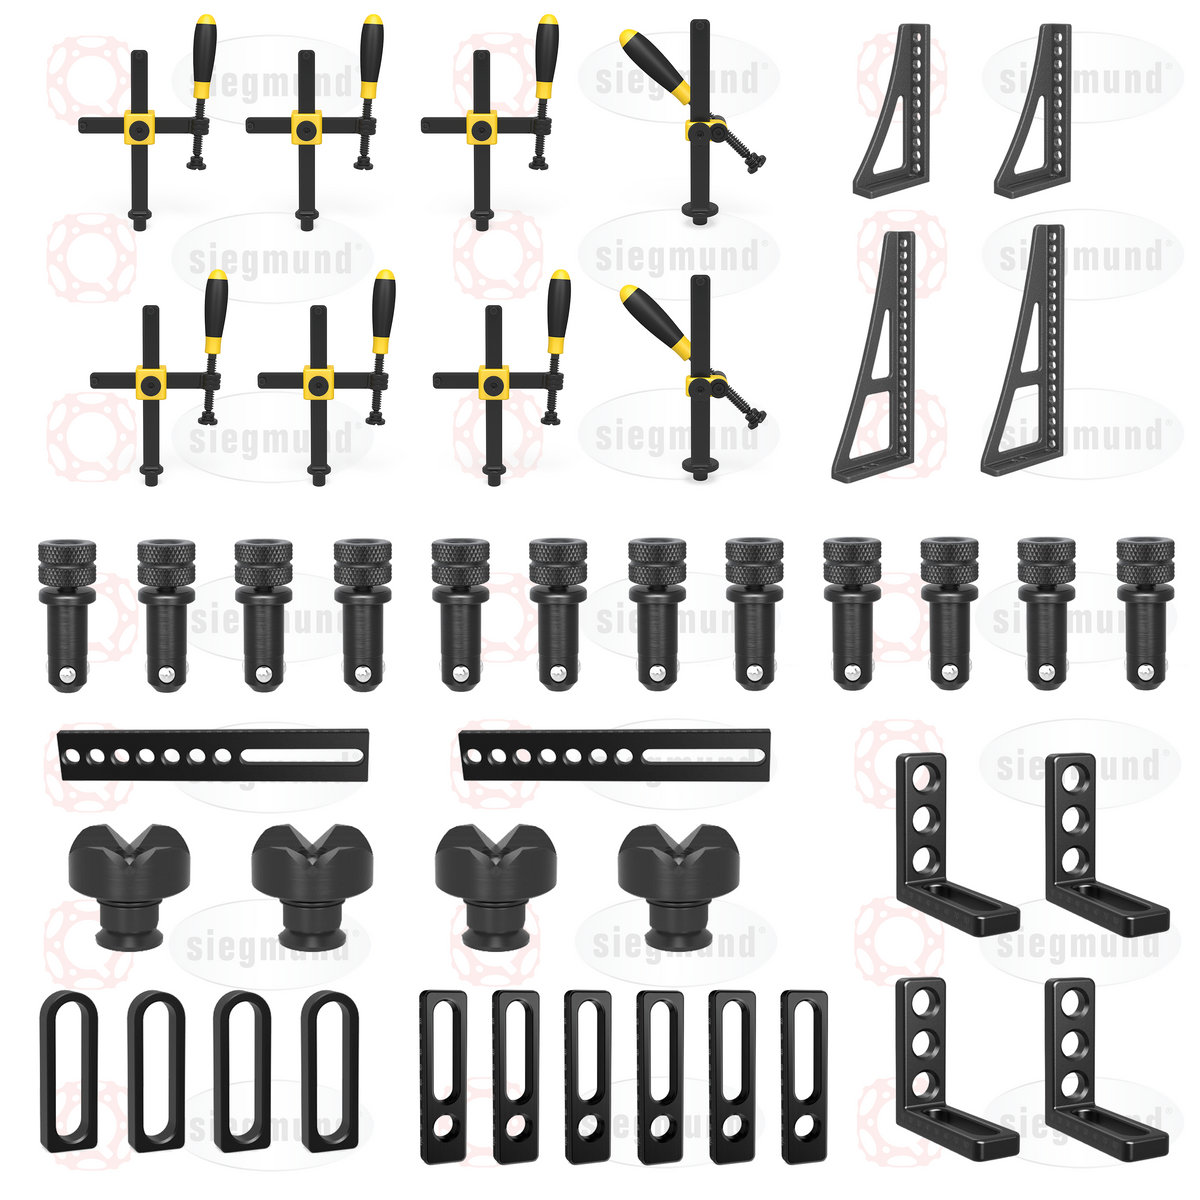 US163200: Set 2, 50 Piece Accessory Kit for the System 16 Imperial Series Welding Tables